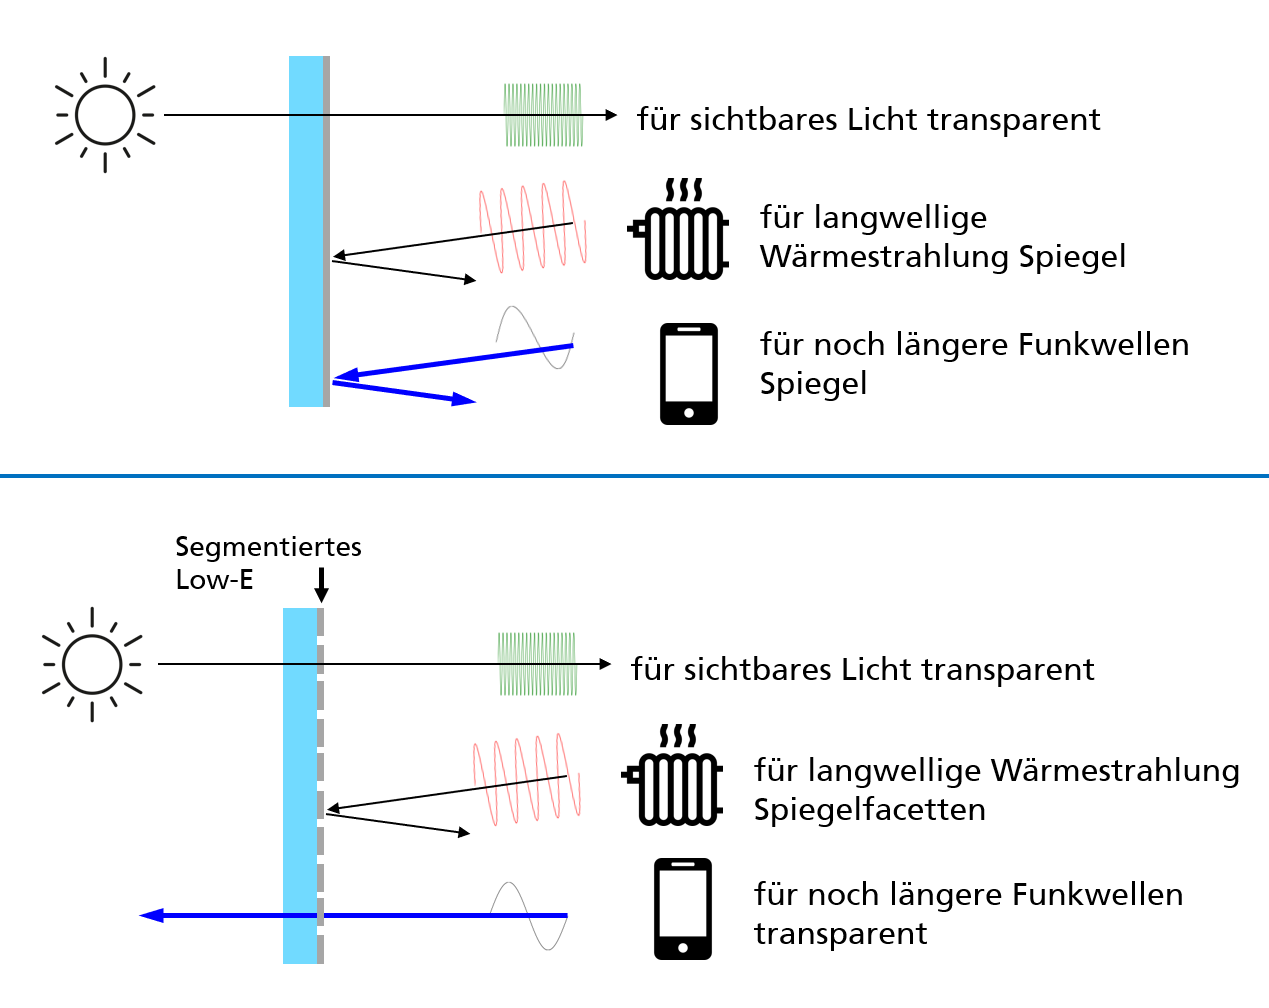 Segmentation of the Low-E layer leads to increased radio transparency. 